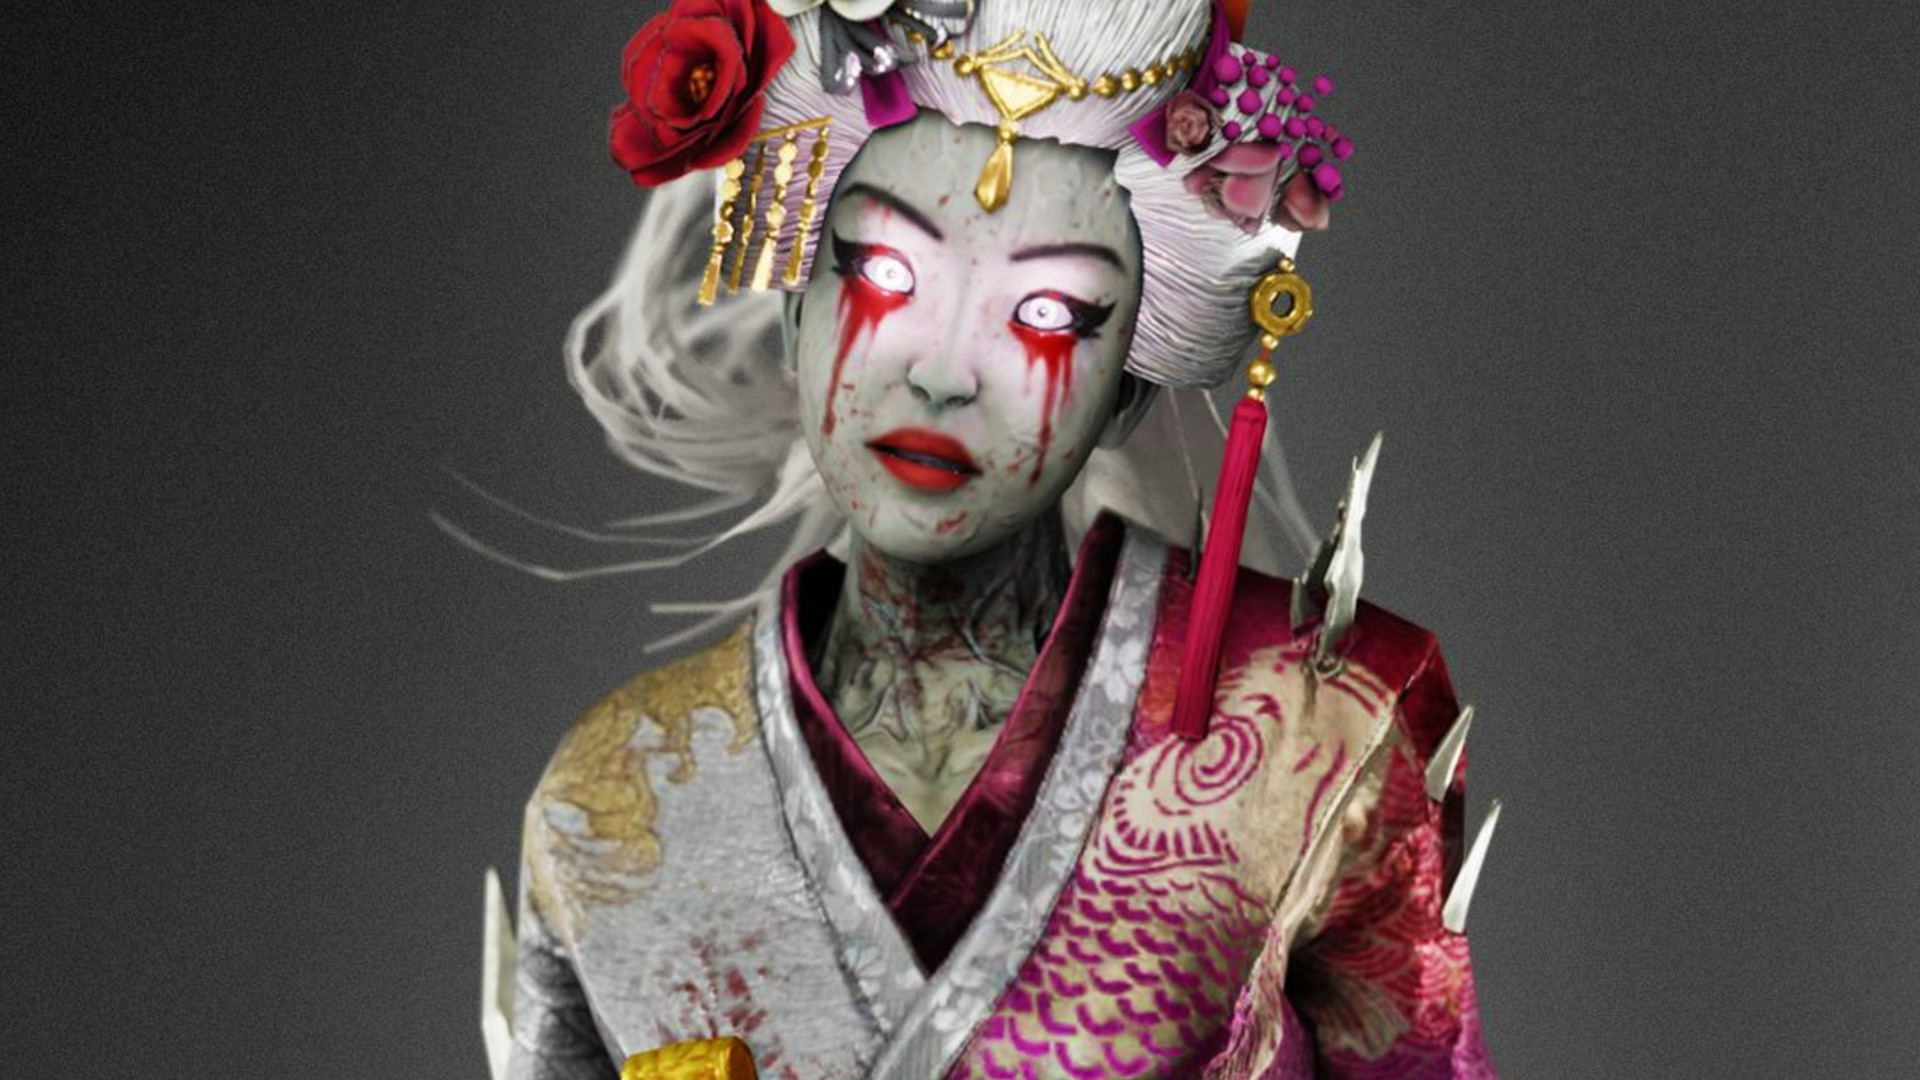 New Dead by Daylight Killer skins are a Japanese nightmare